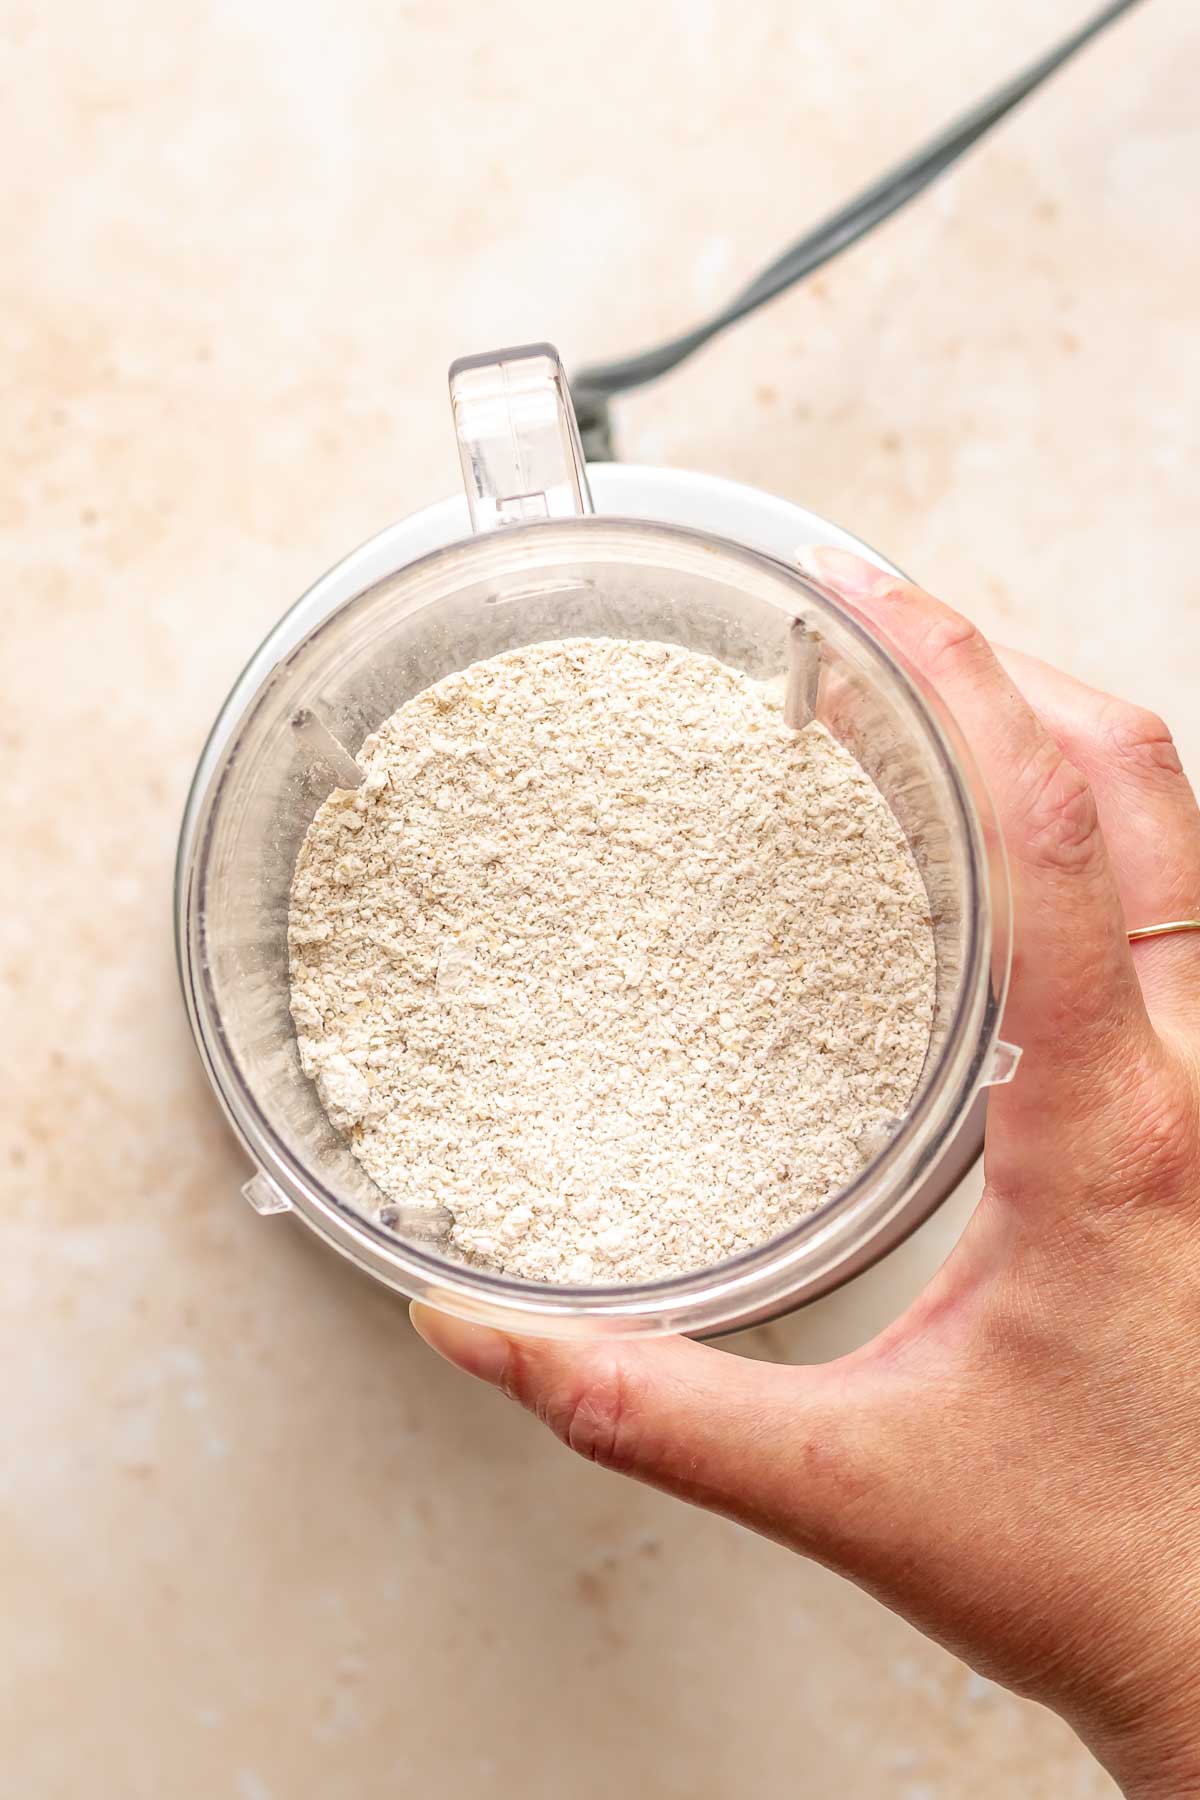 Pureed oats in a blender.